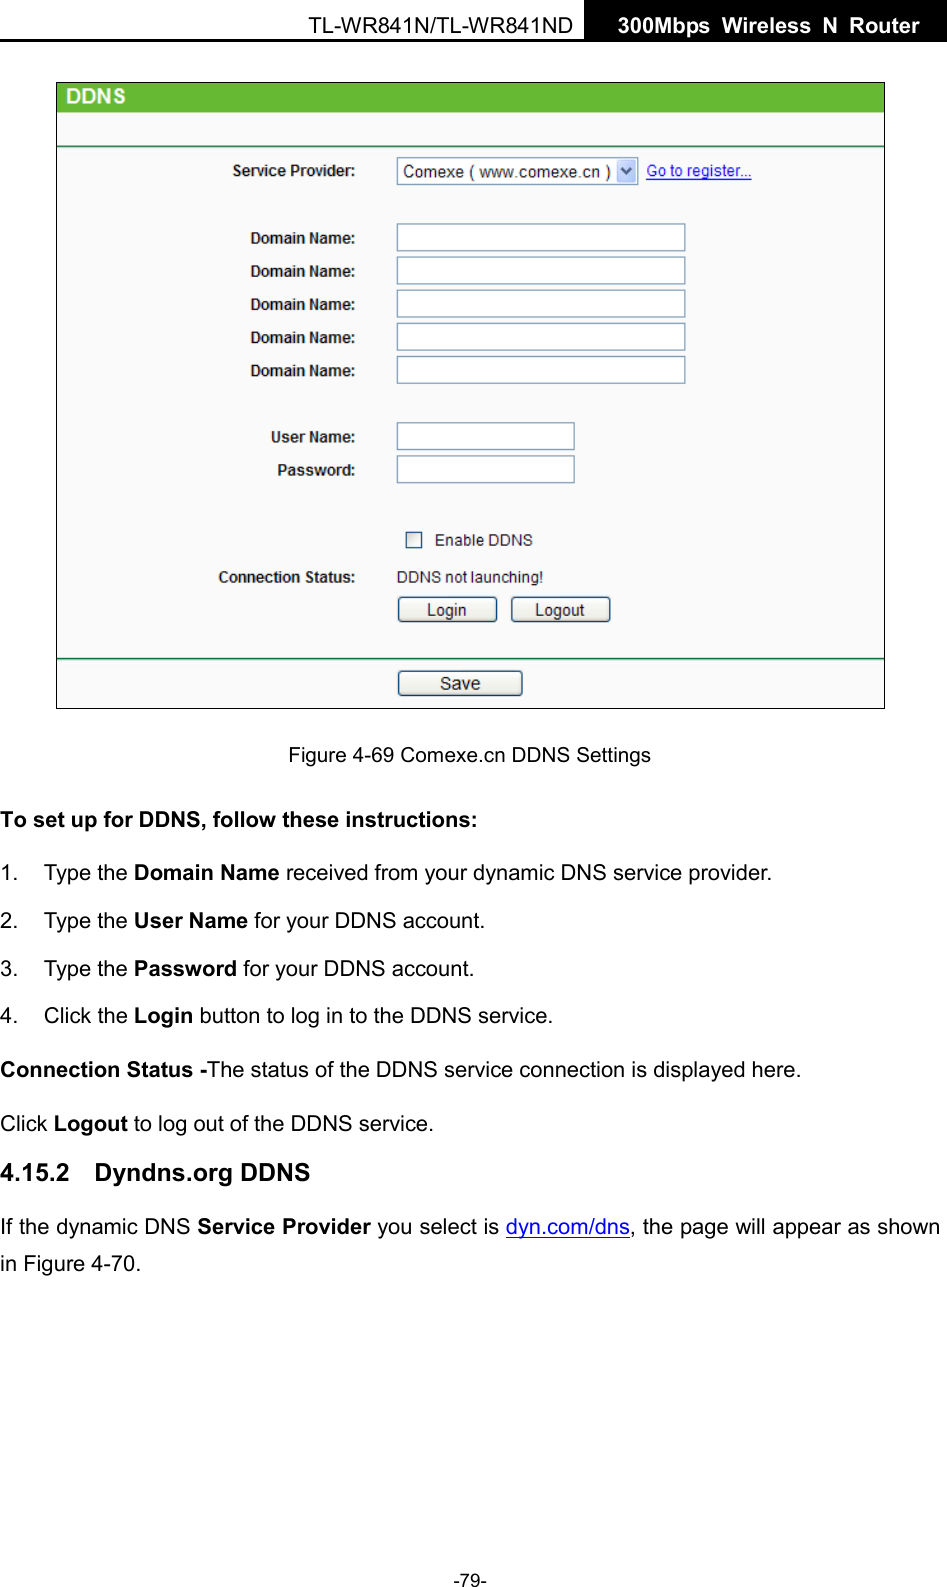  TL-WR841N/TL-WR841ND  300Mbps Wireless N  Router     Figure 4-69 Comexe.cn DDNS Settings To set up for DDNS, follow these instructions: 1. Type the Domain Name received from your dynamic DNS service provider.     2. Type the User Name for your DDNS account.   3. Type the Password for your DDNS account.   4. Click the Login button to log in to the DDNS service. Connection Status -The status of the DDNS service connection is displayed here. Click Logout to log out of the DDNS service.   4.15.2 Dyndns.org DDNS If the dynamic DNS Service Provider you select is dyn.com/dns, the page will appear as shown in Figure 4-70. -79- 